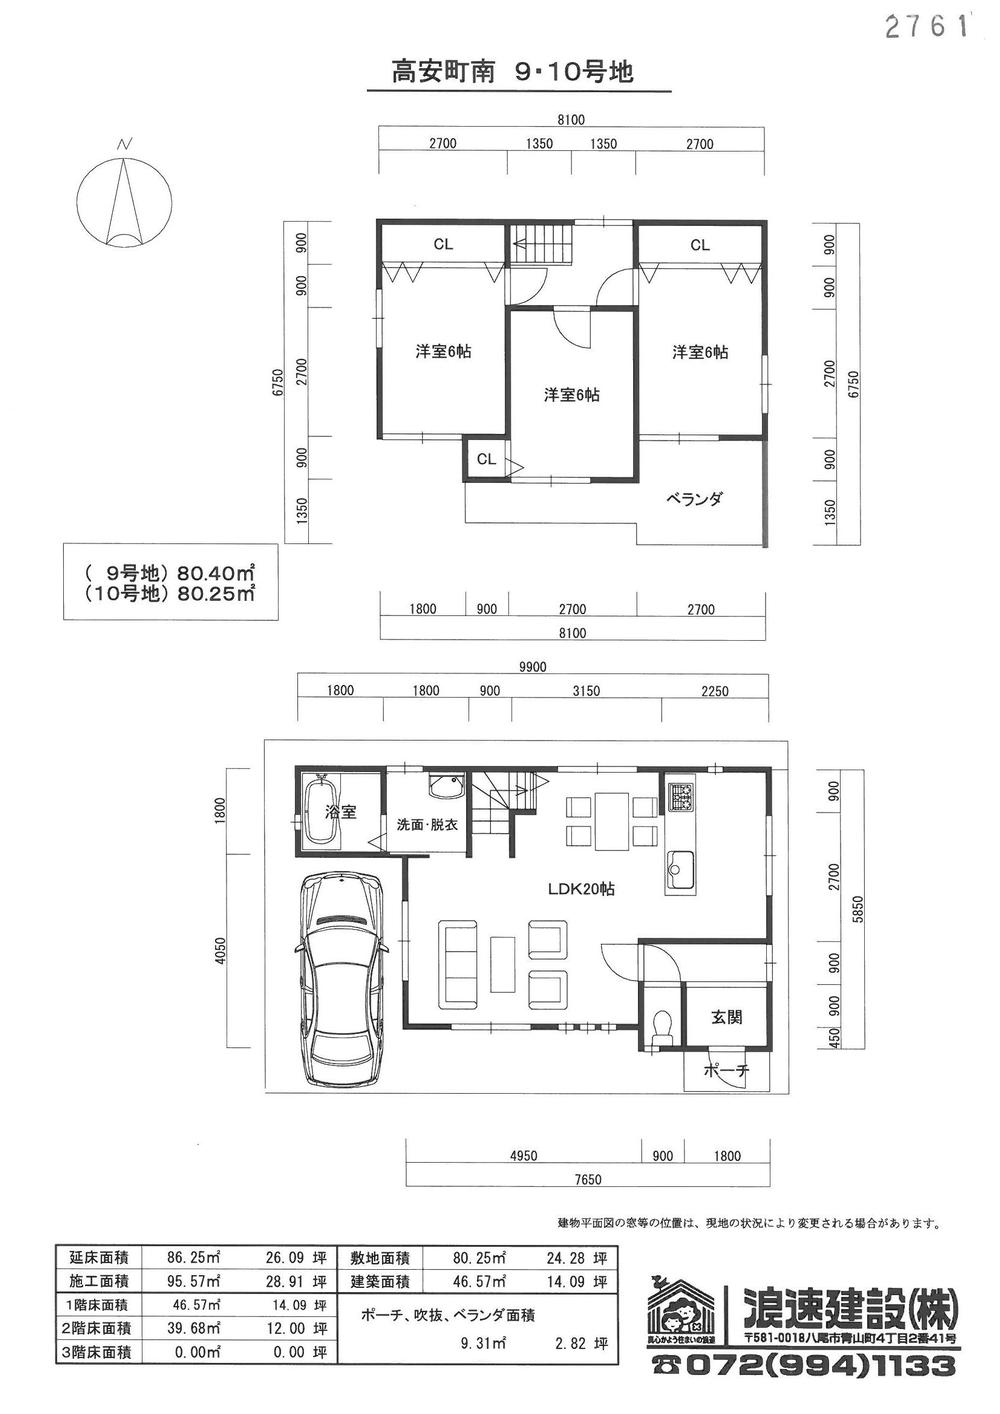 Other building plan example. South-facing plan: Building plan example (No. 10 place) building price 15,130,000 yen, Building area 86.25 sq m